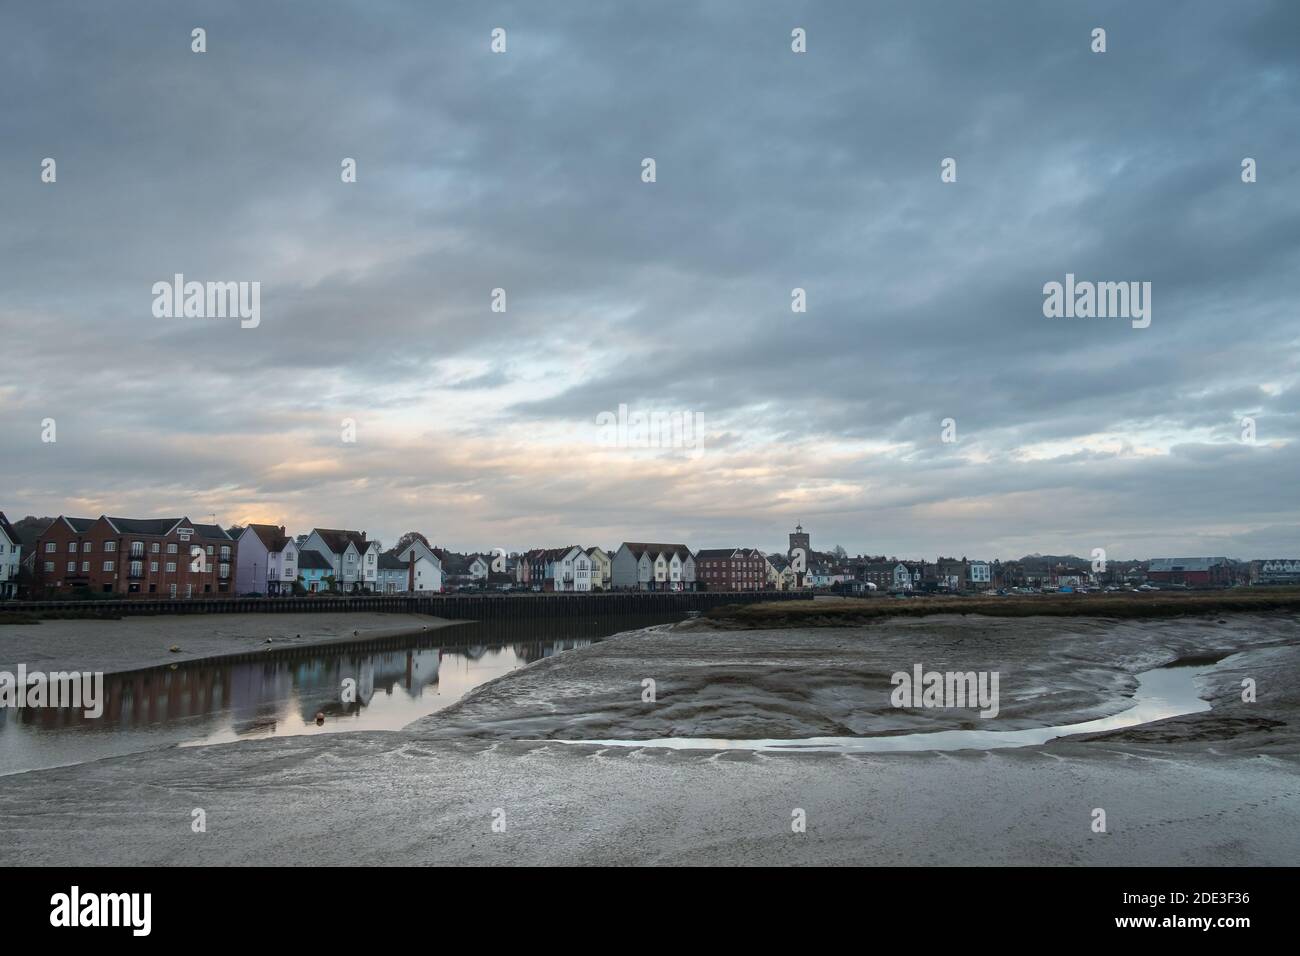 The picturesque Essex town of Wivenhoe on the River Colne is a desirable location. Stock Photo